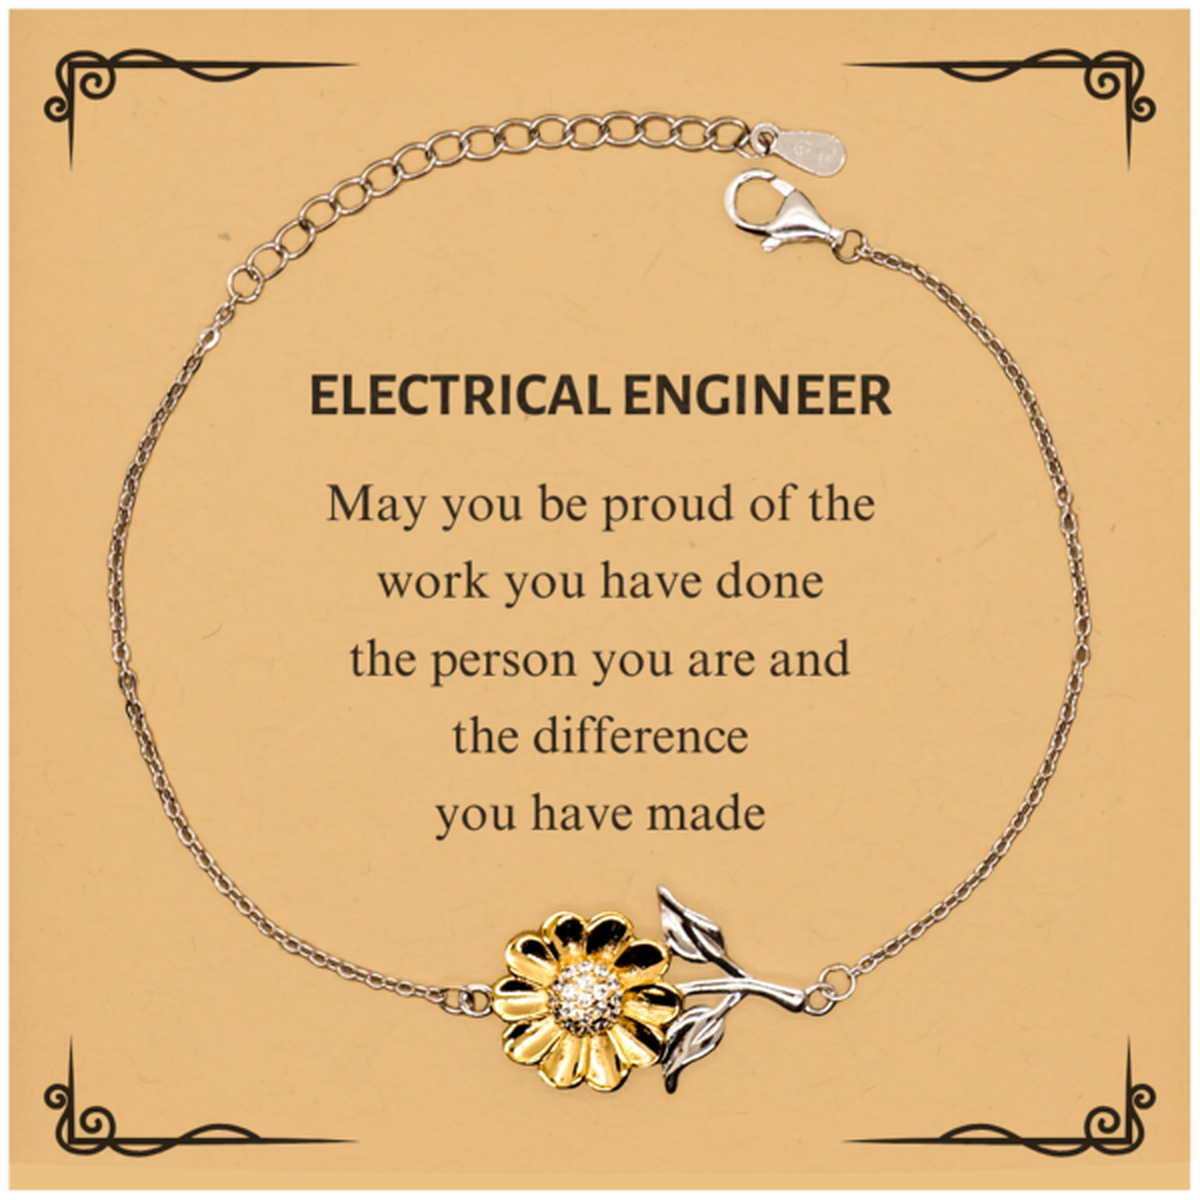 Electrical Engineer May you be proud of the work you have done, Retirement Electrical Engineer Sunflower Bracelet for Colleague Appreciation Gifts Amazing for Electrical Engineer